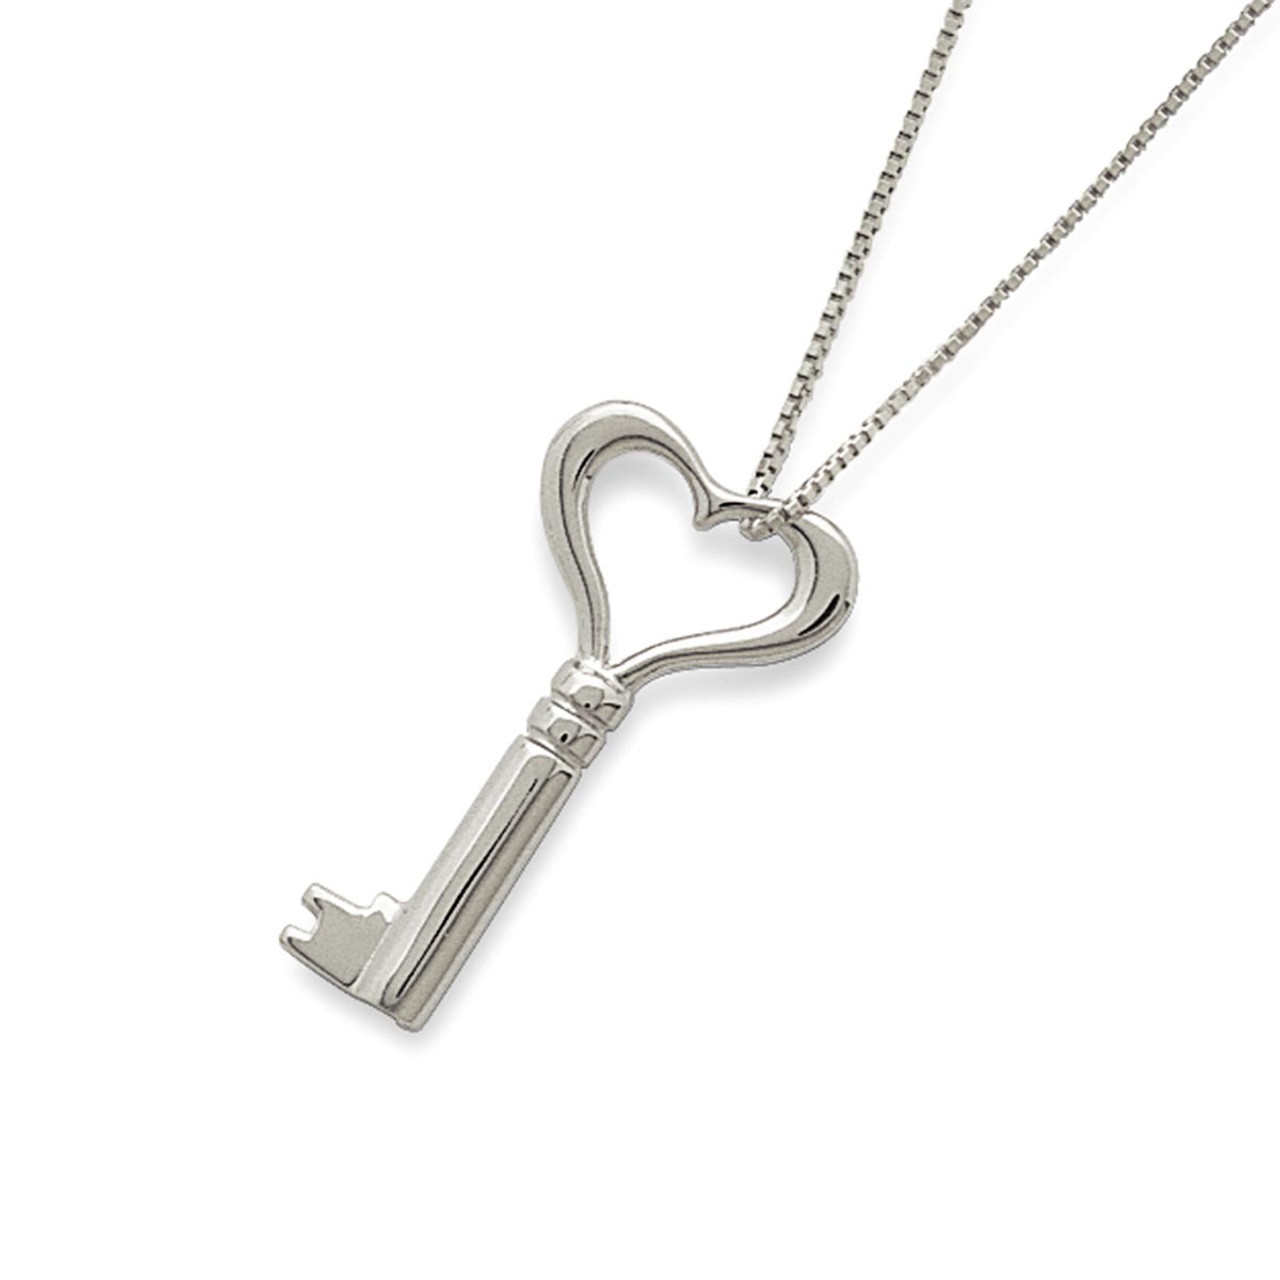 Tiffany & Co. Large Key Necklace in Sterling Silver